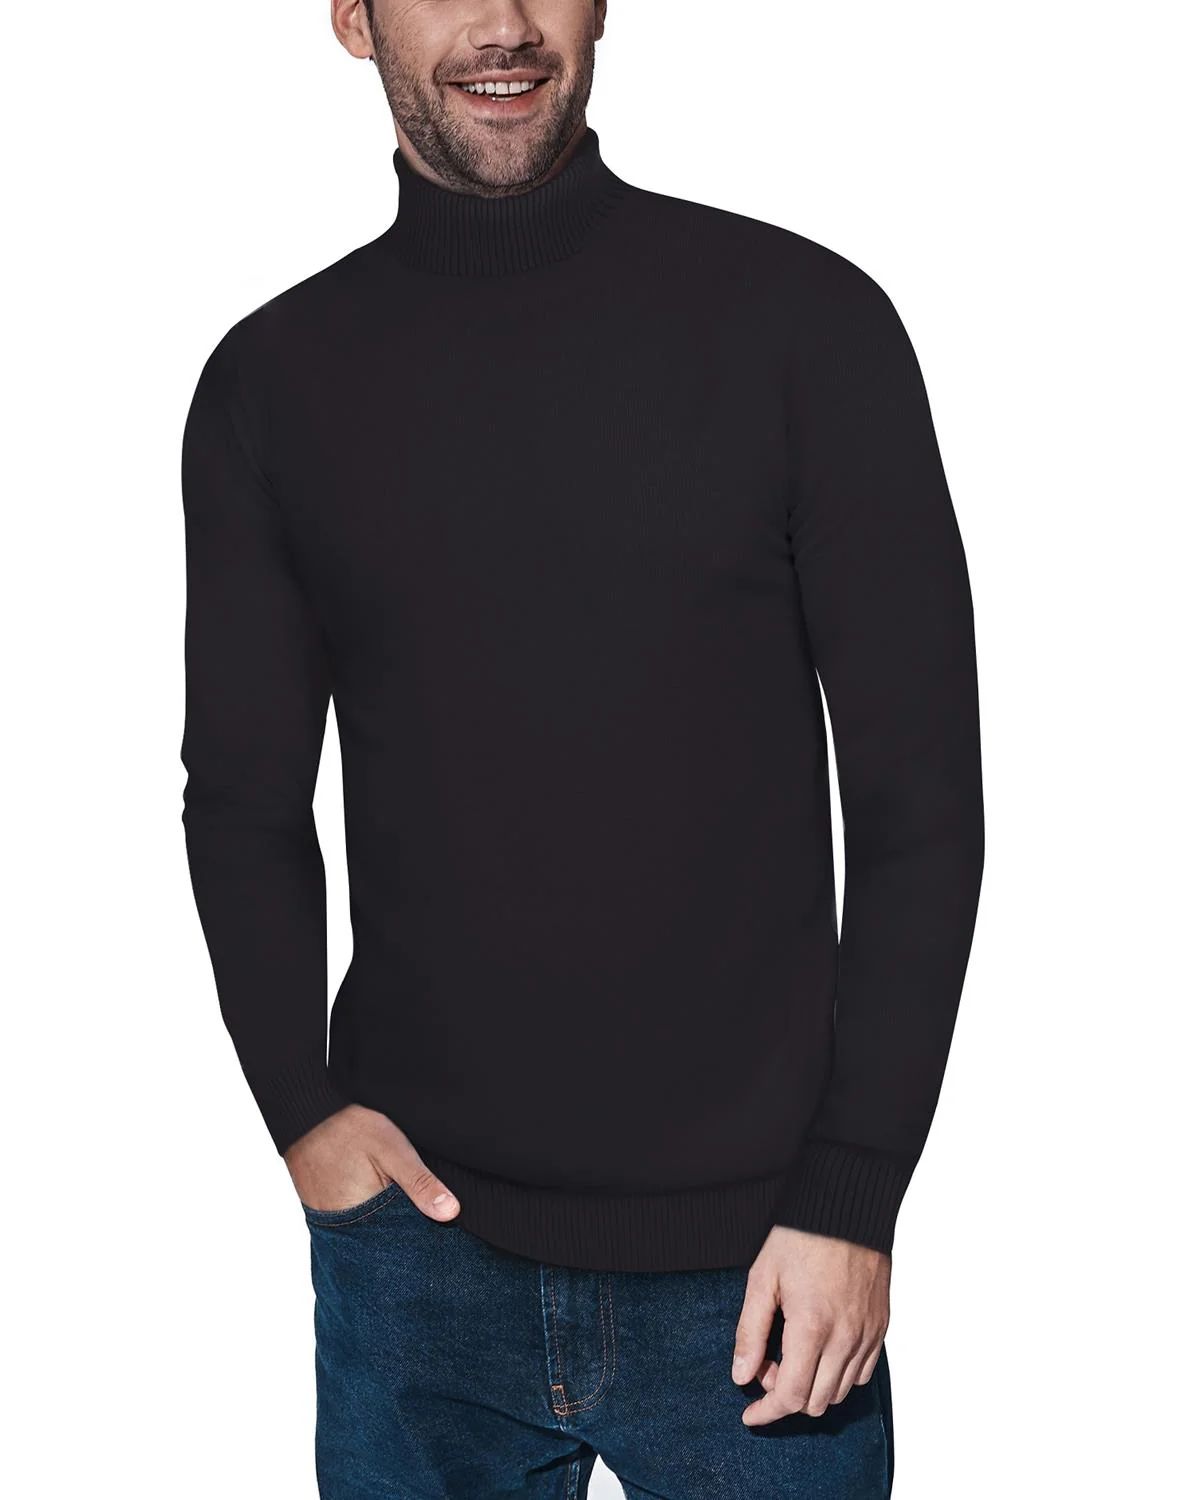 XRAY Men's Turtleneck Sweater in Black Large Lord & Taylor | Lord & Taylor